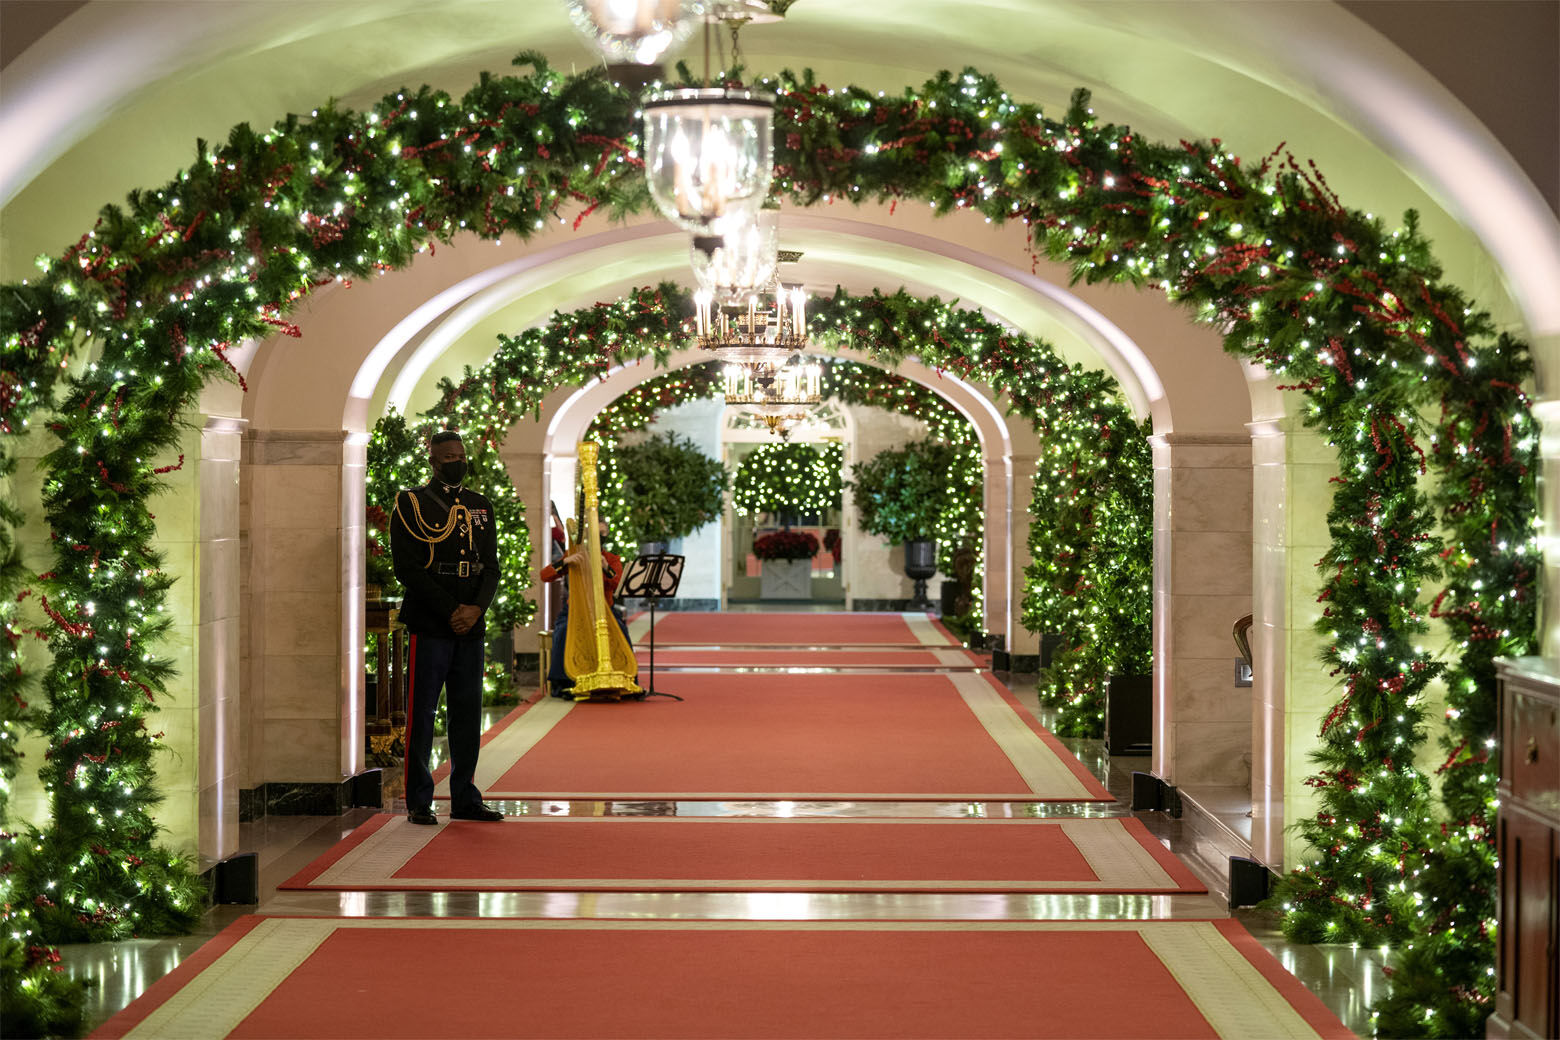 The Center Hall of the White House is decorated for the holiday season during a press preview of the White House holiday decorations, Monday, Nov. 29, 2021, in Washington. (AP Photo/Evan Vucci)